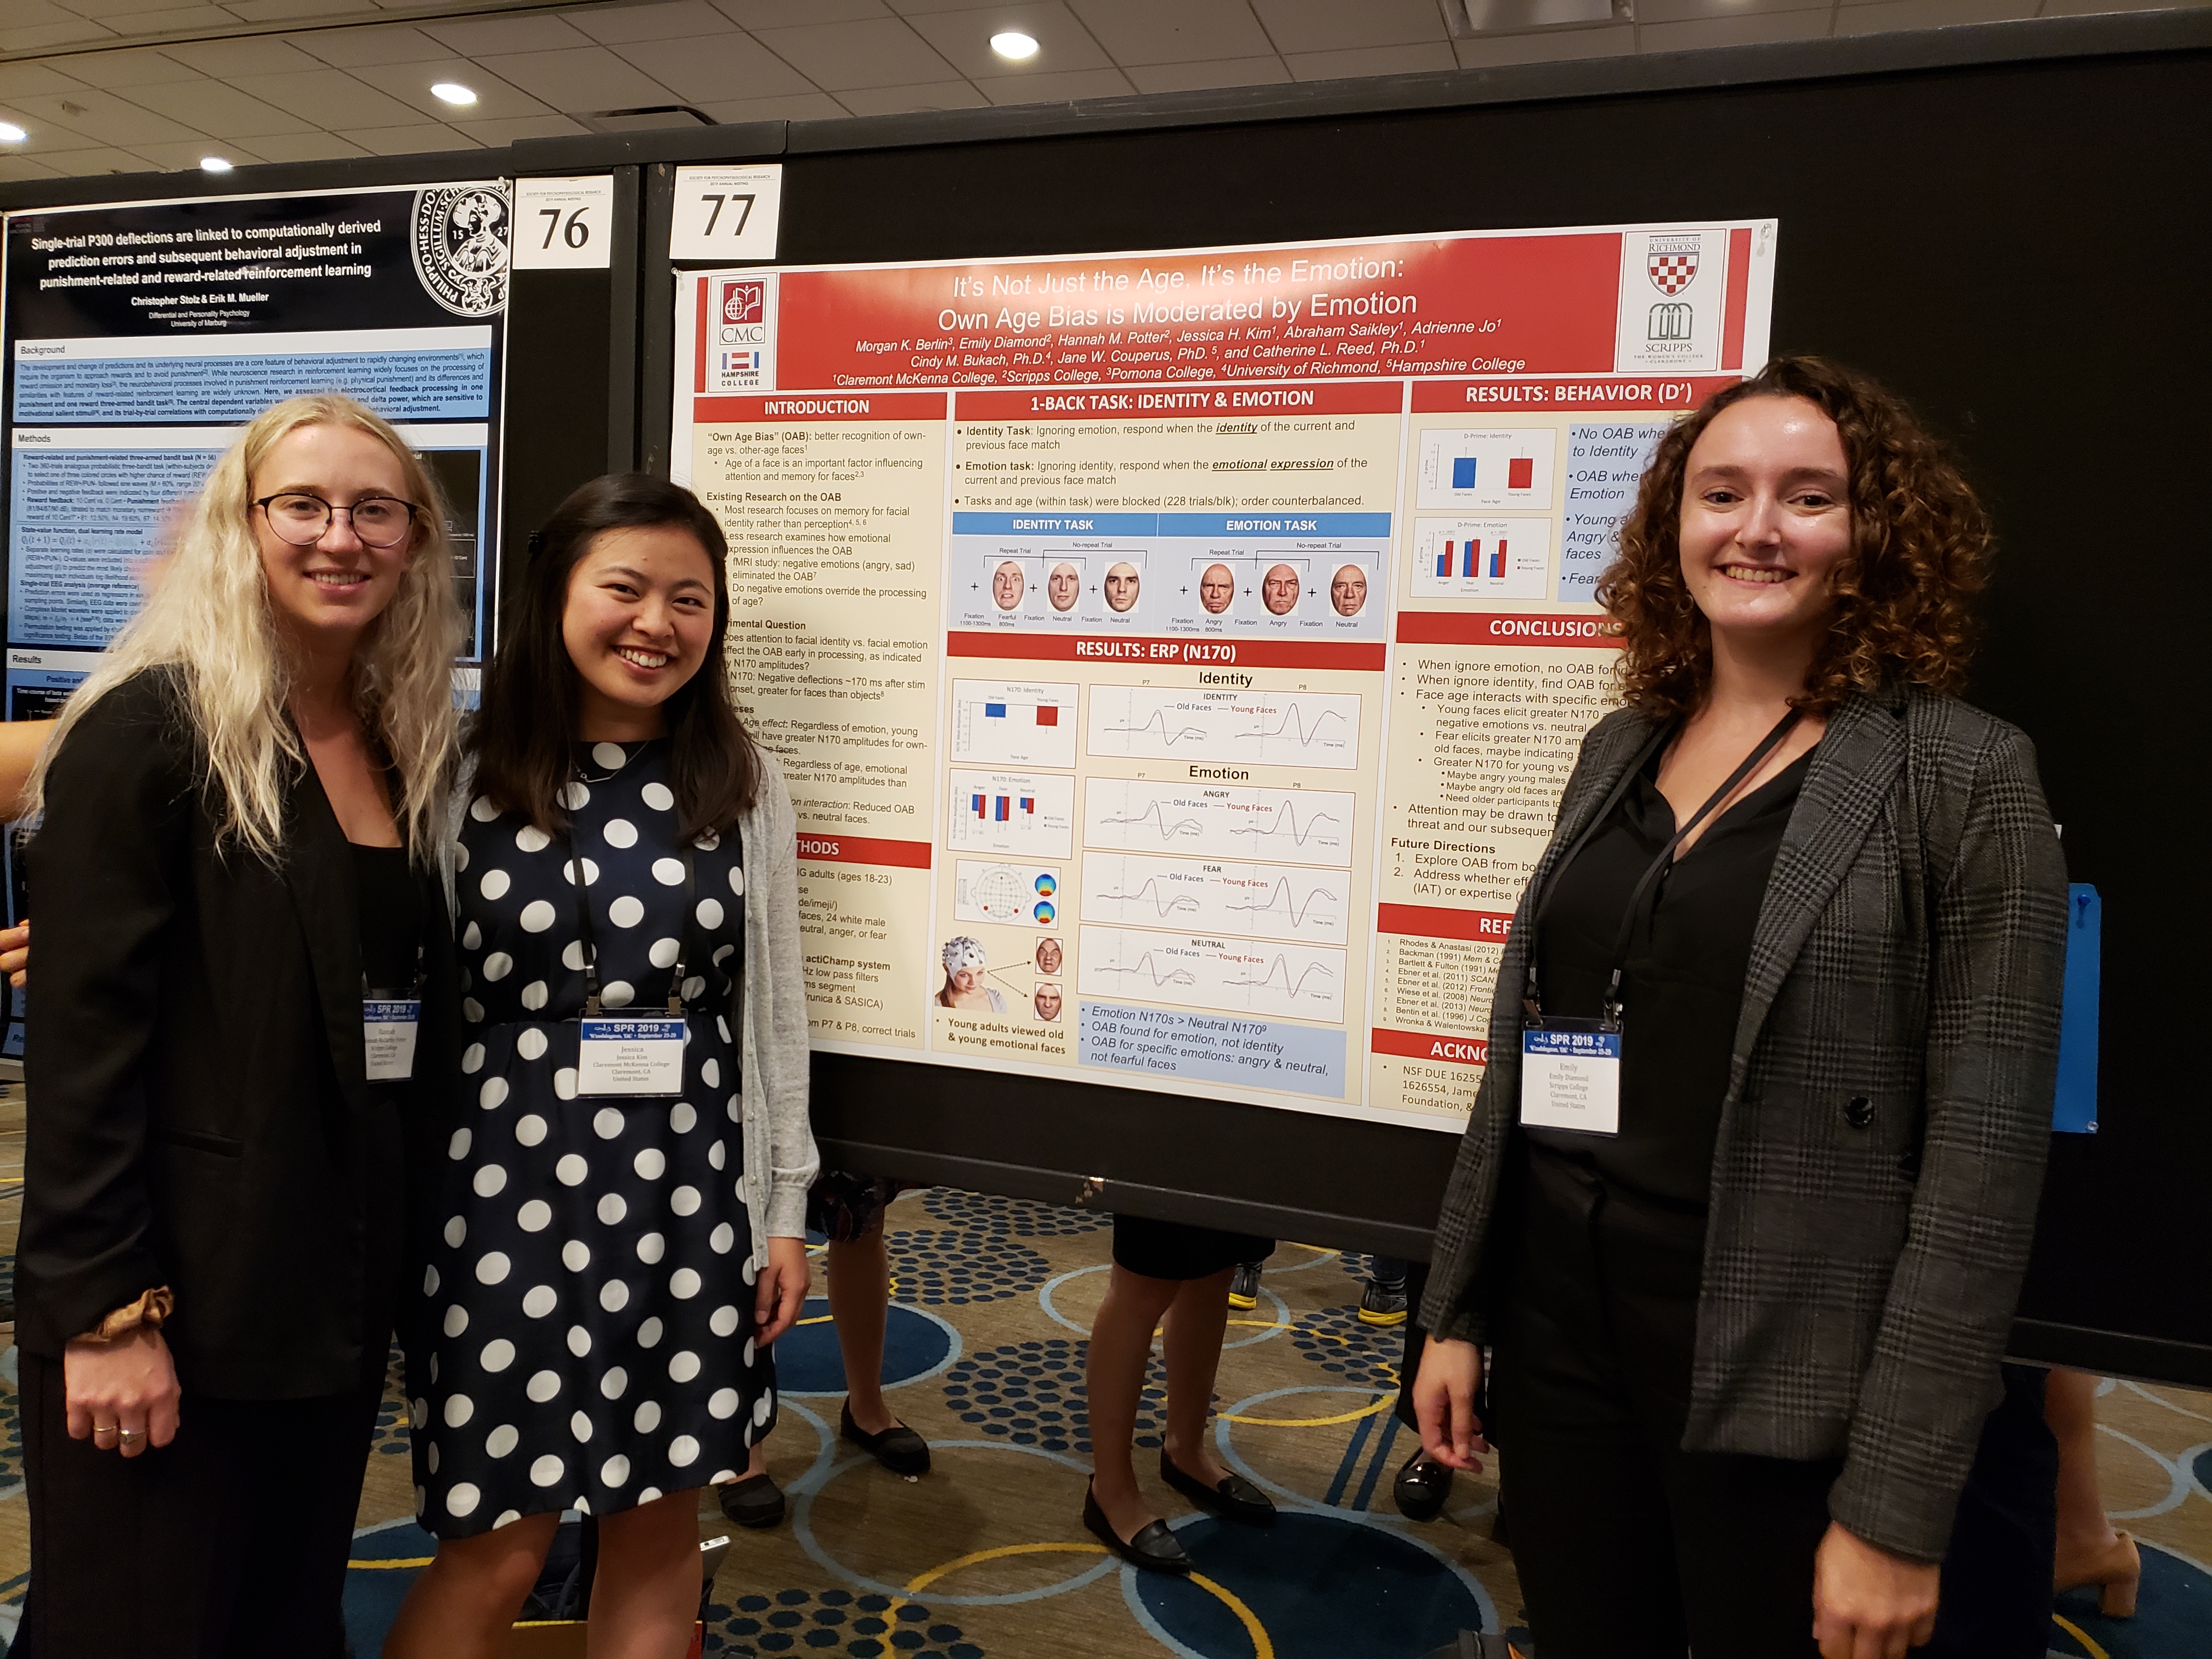 Hannah McCarthy Potter, Jessica Kim & Emily Diamond at Society for Psychophysiological Research